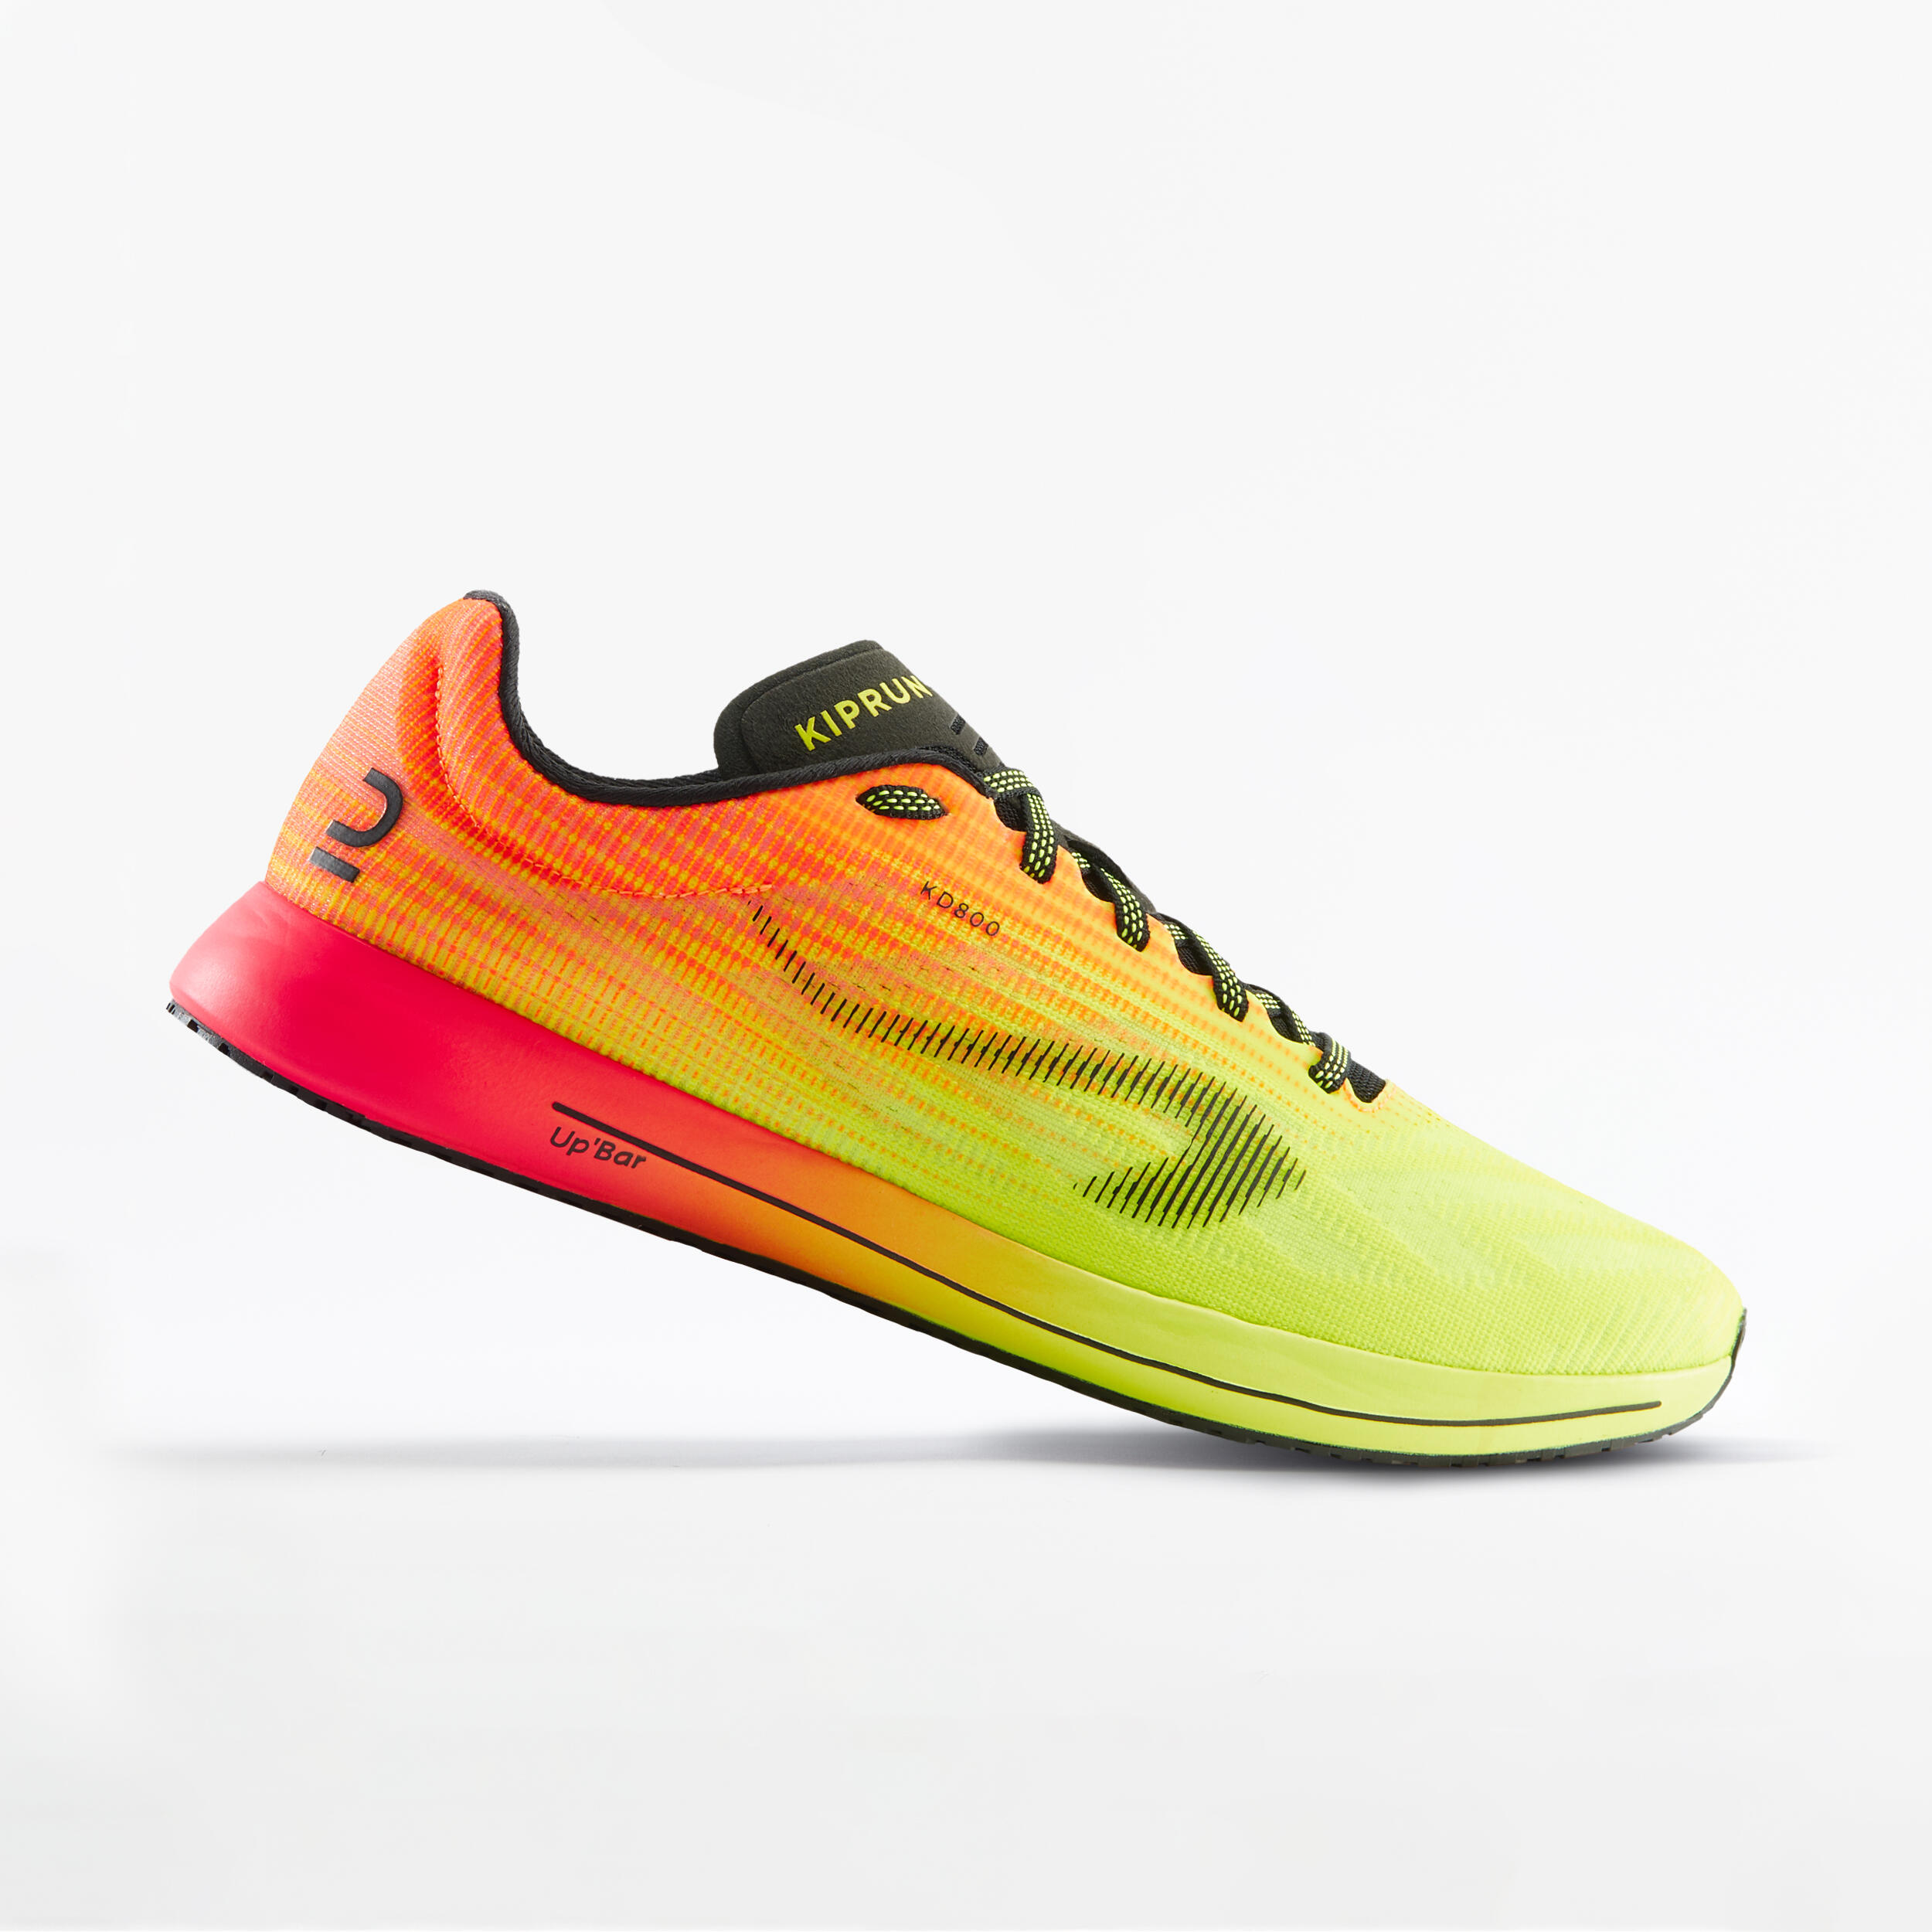 fluo lime yellow / fluo ultra pink